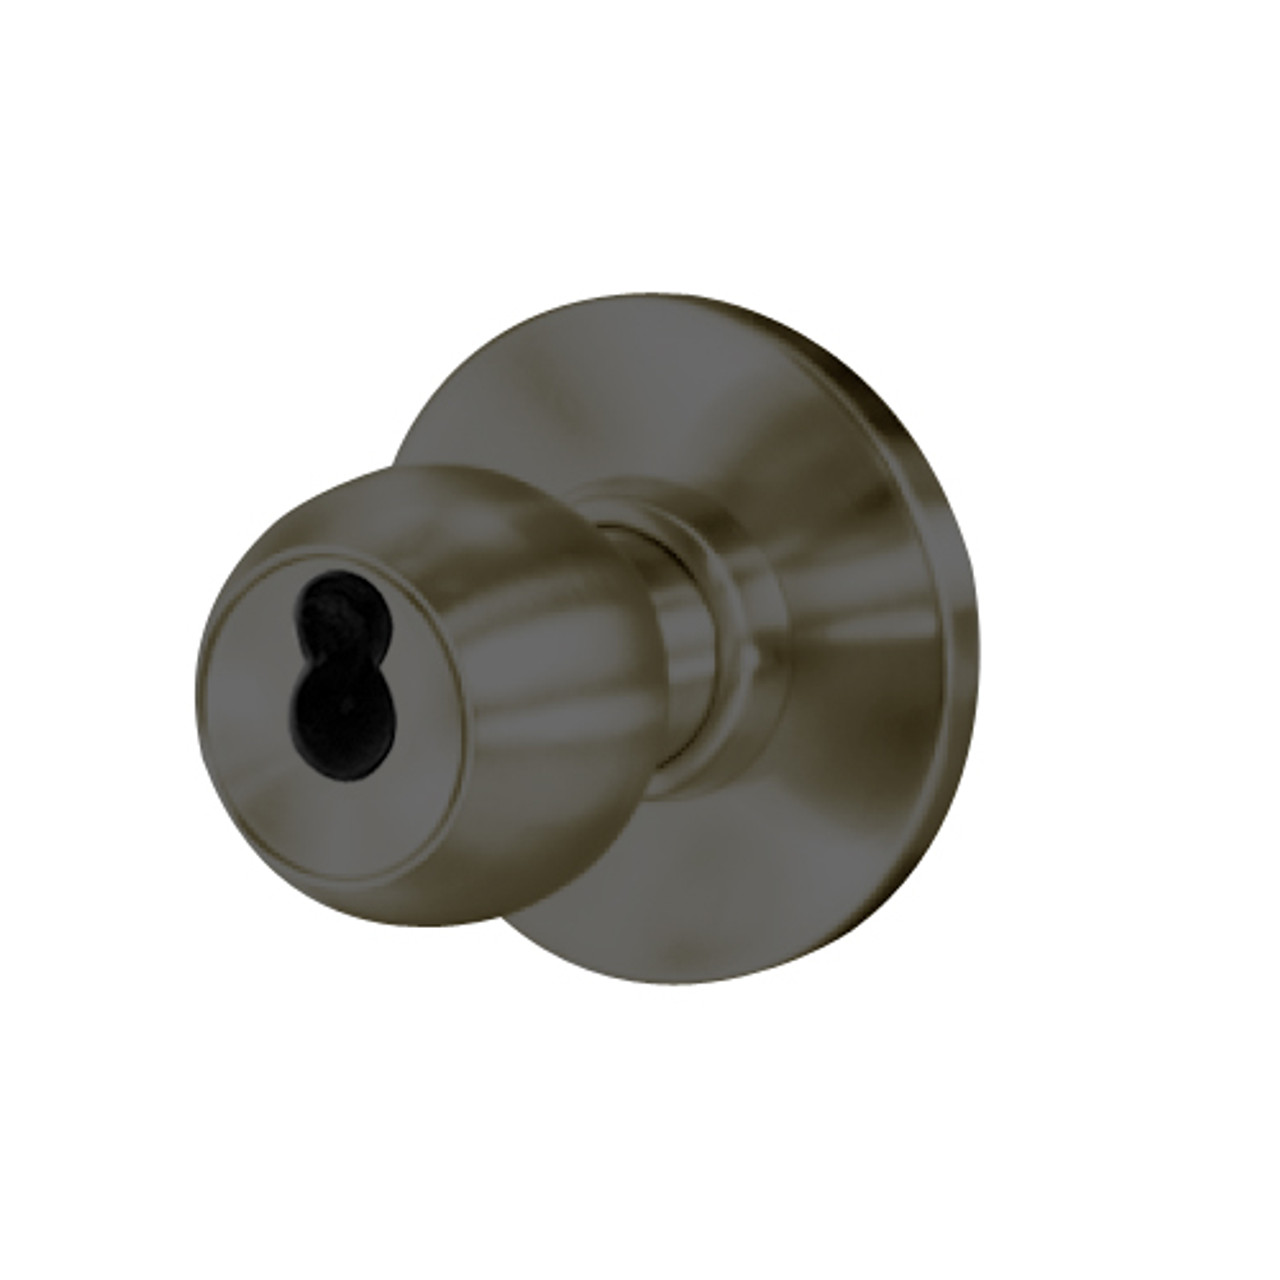 8K57XR4ASTK613 Best 8K Series Special Heavy Duty Cylindrical Knob Locks with Round Style in Oil Rubbed Bronze